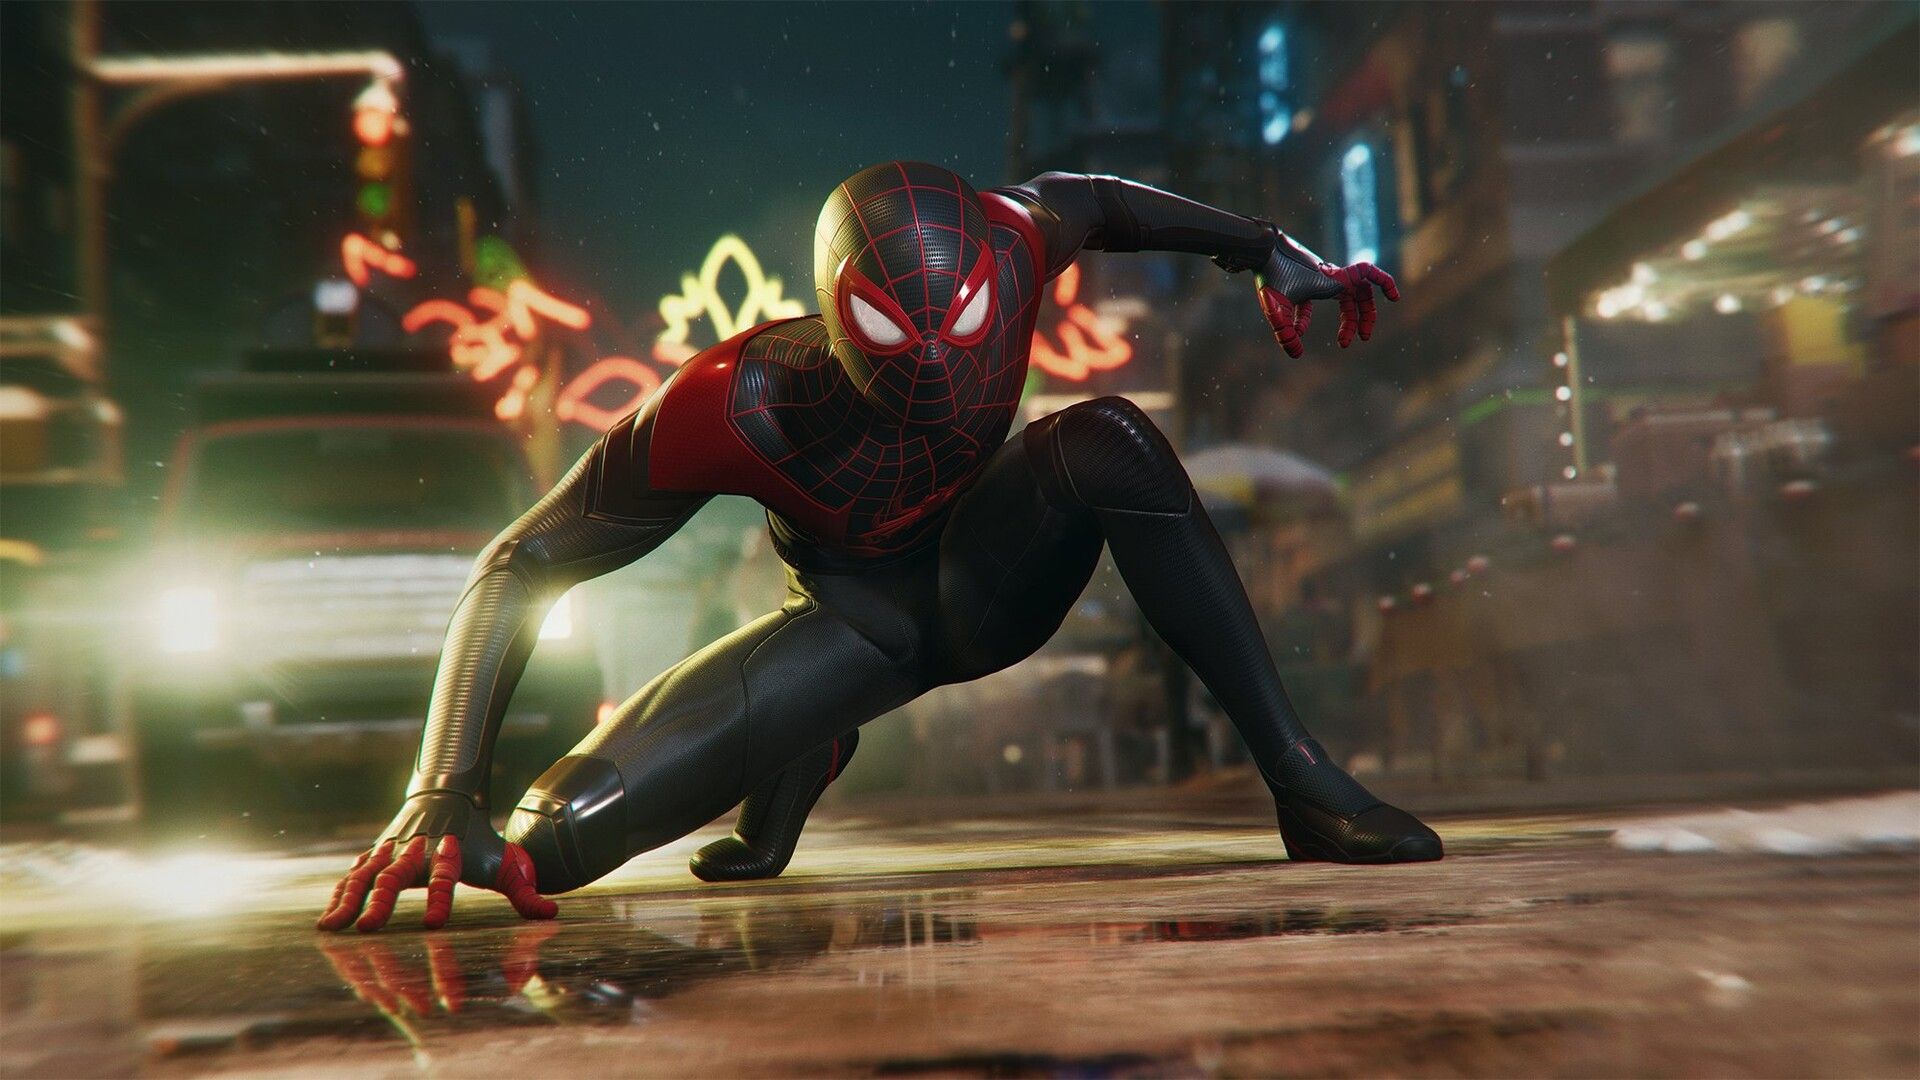 PS5's Spider Man: Miles Morales Image Vs PS4's Spider Man Screenshots Comparison Shows How Far The PlayStation Has Come.net News